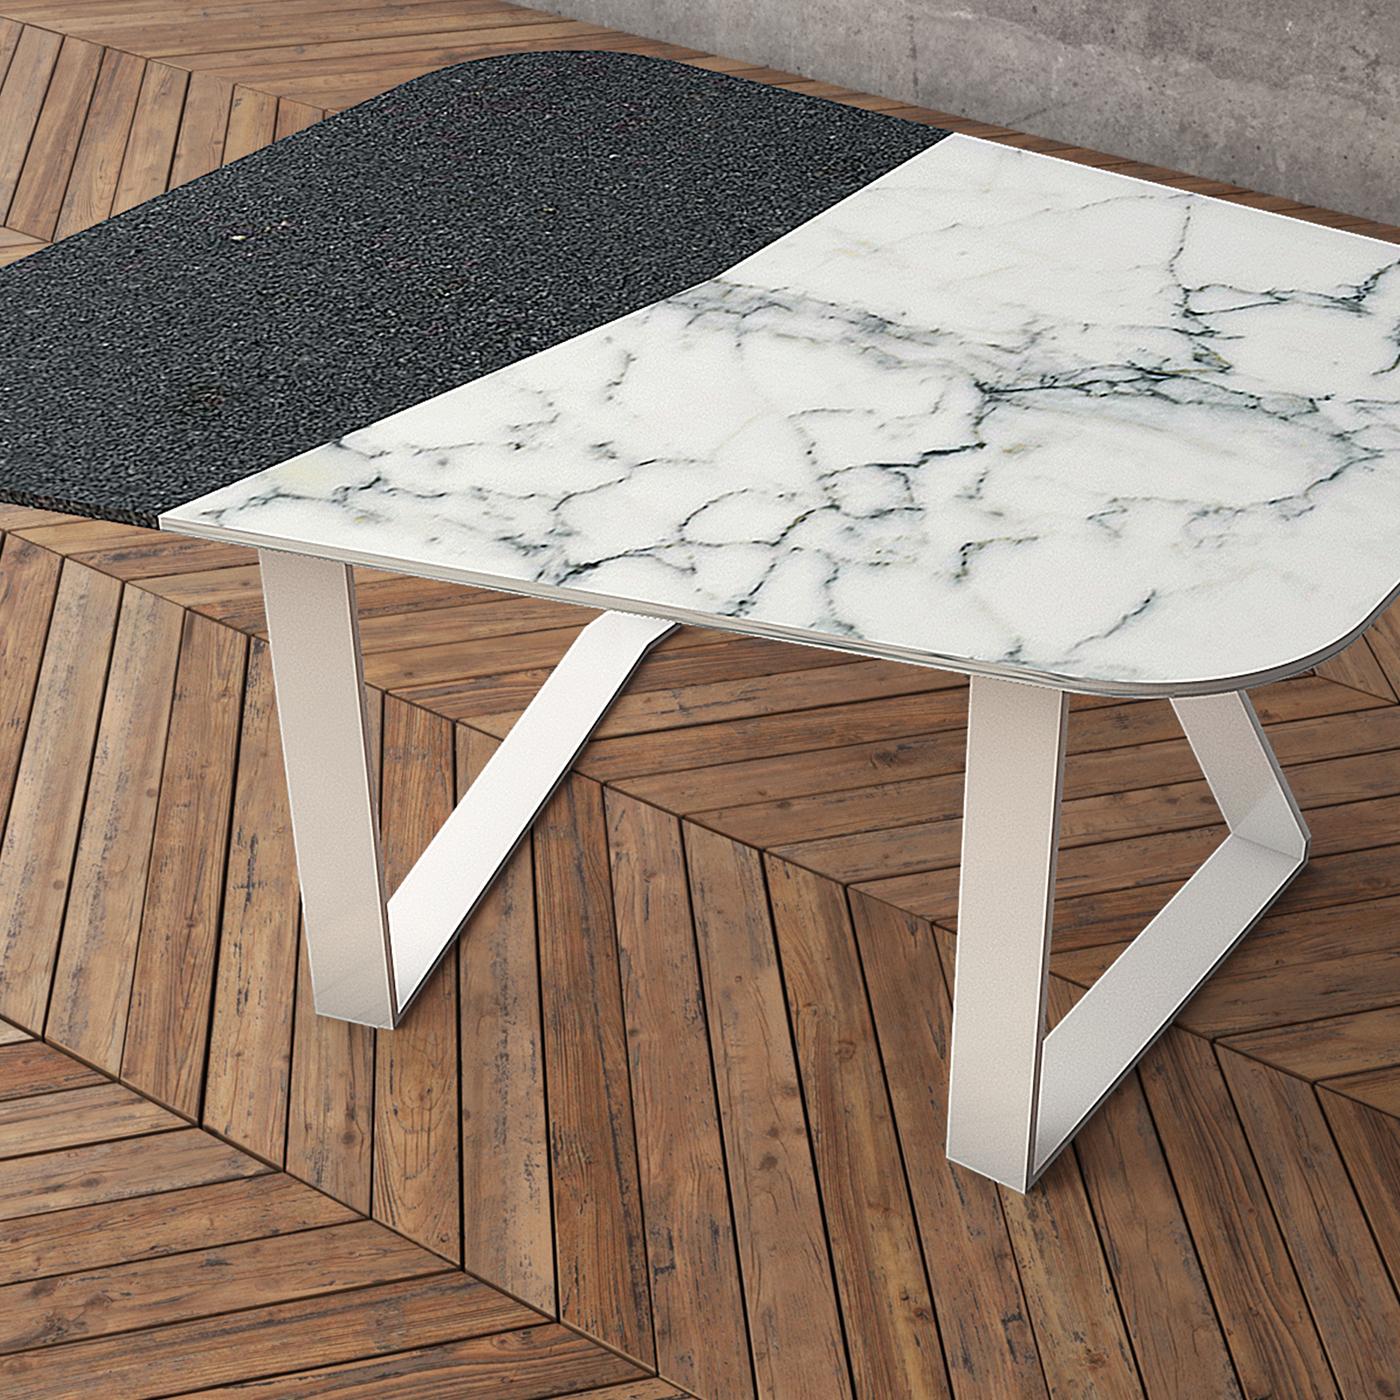 Functional and highly decorative, this coffee table combines two traditional Italian materials in a contemporary design of sleek and sophisticated allure. The top is in luxurious Carrara marble and lava stone sourced from the Sicilian volcano Etna,